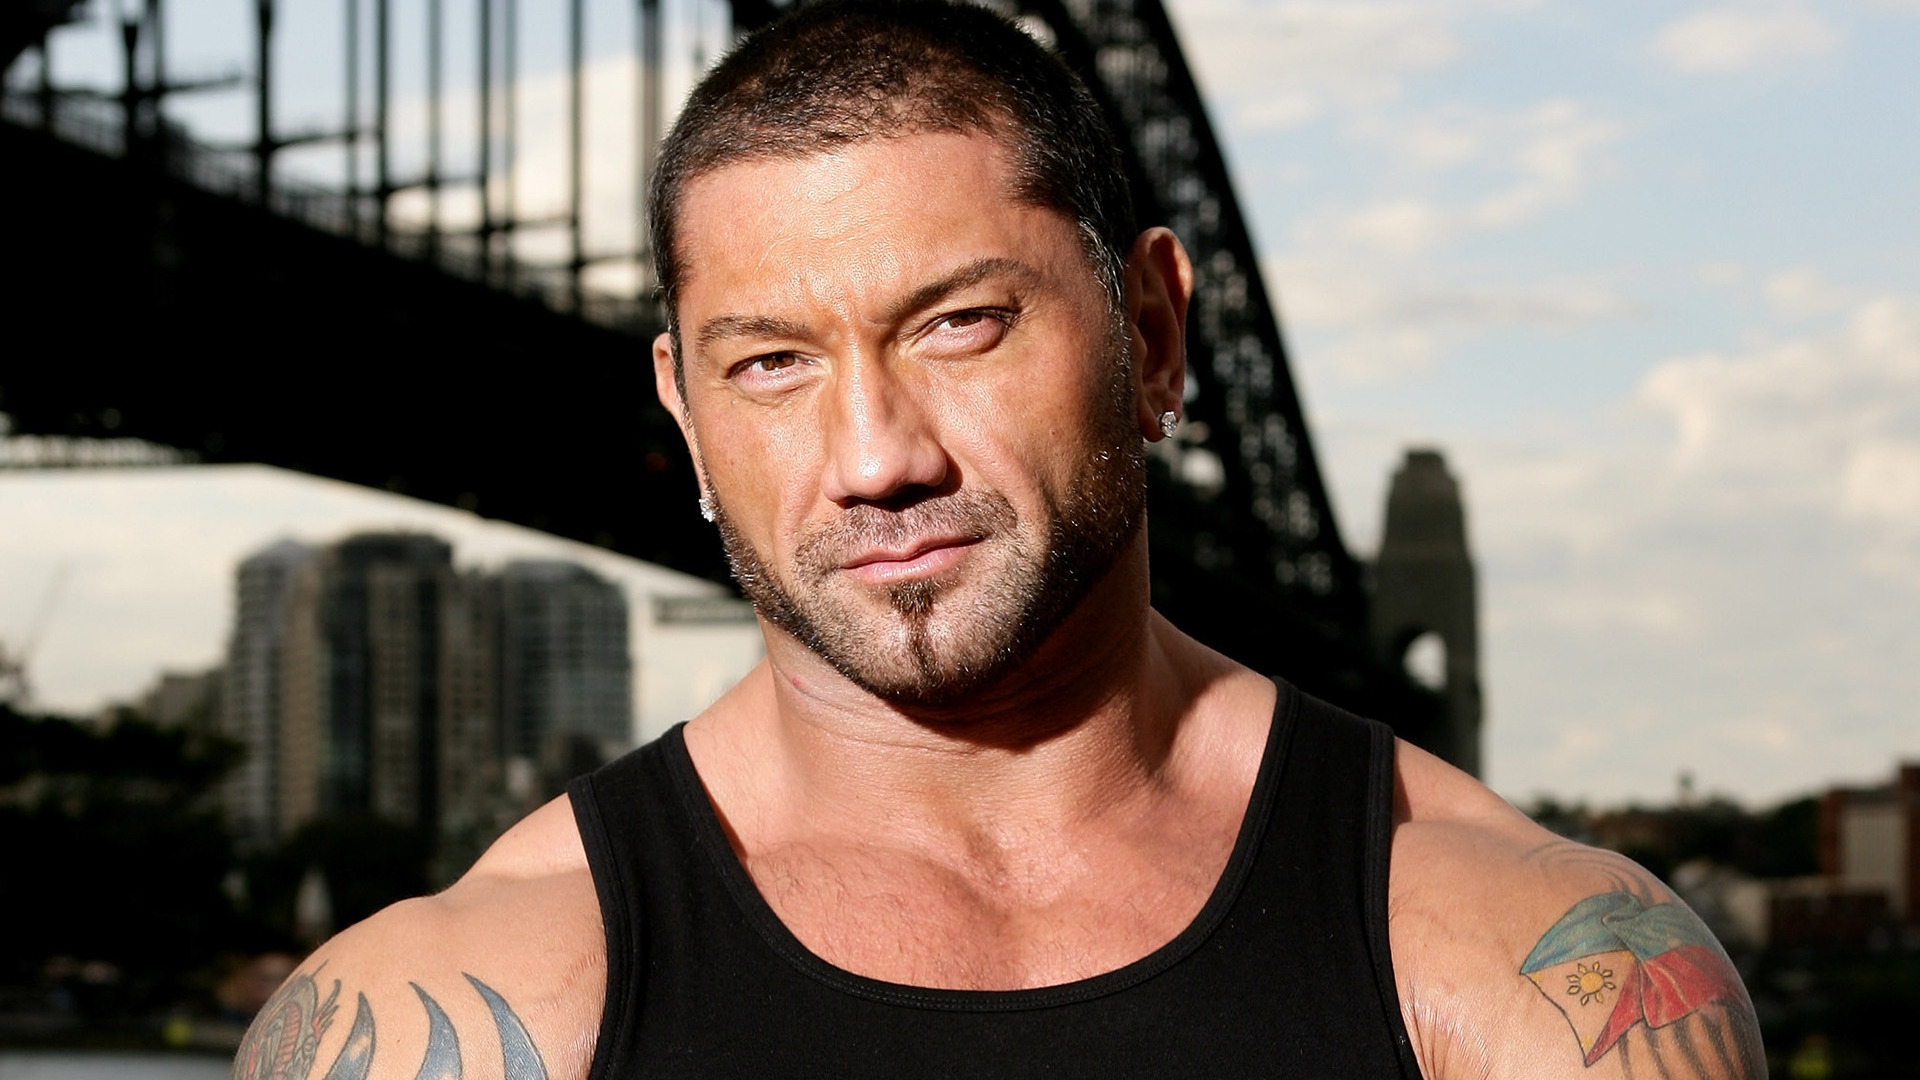 Dave Bautista for 1920 x 1080 HDTV 1080p resolution